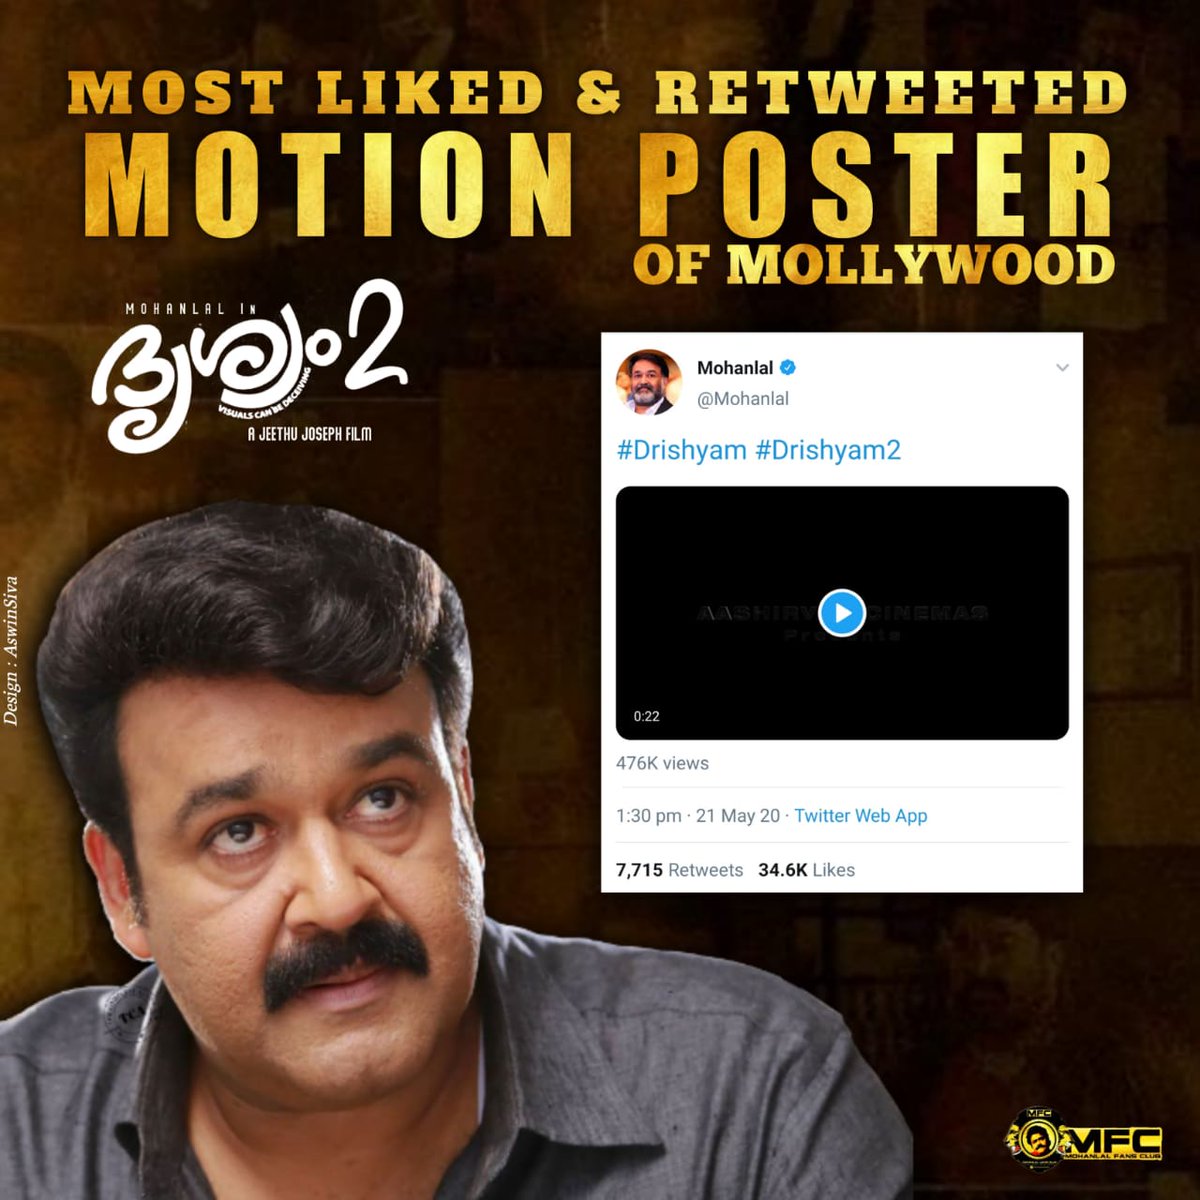 Most Liked Motion Poster of Mollywood 

#Drishyam2 🔥

@Mohanlal #Mohanlal